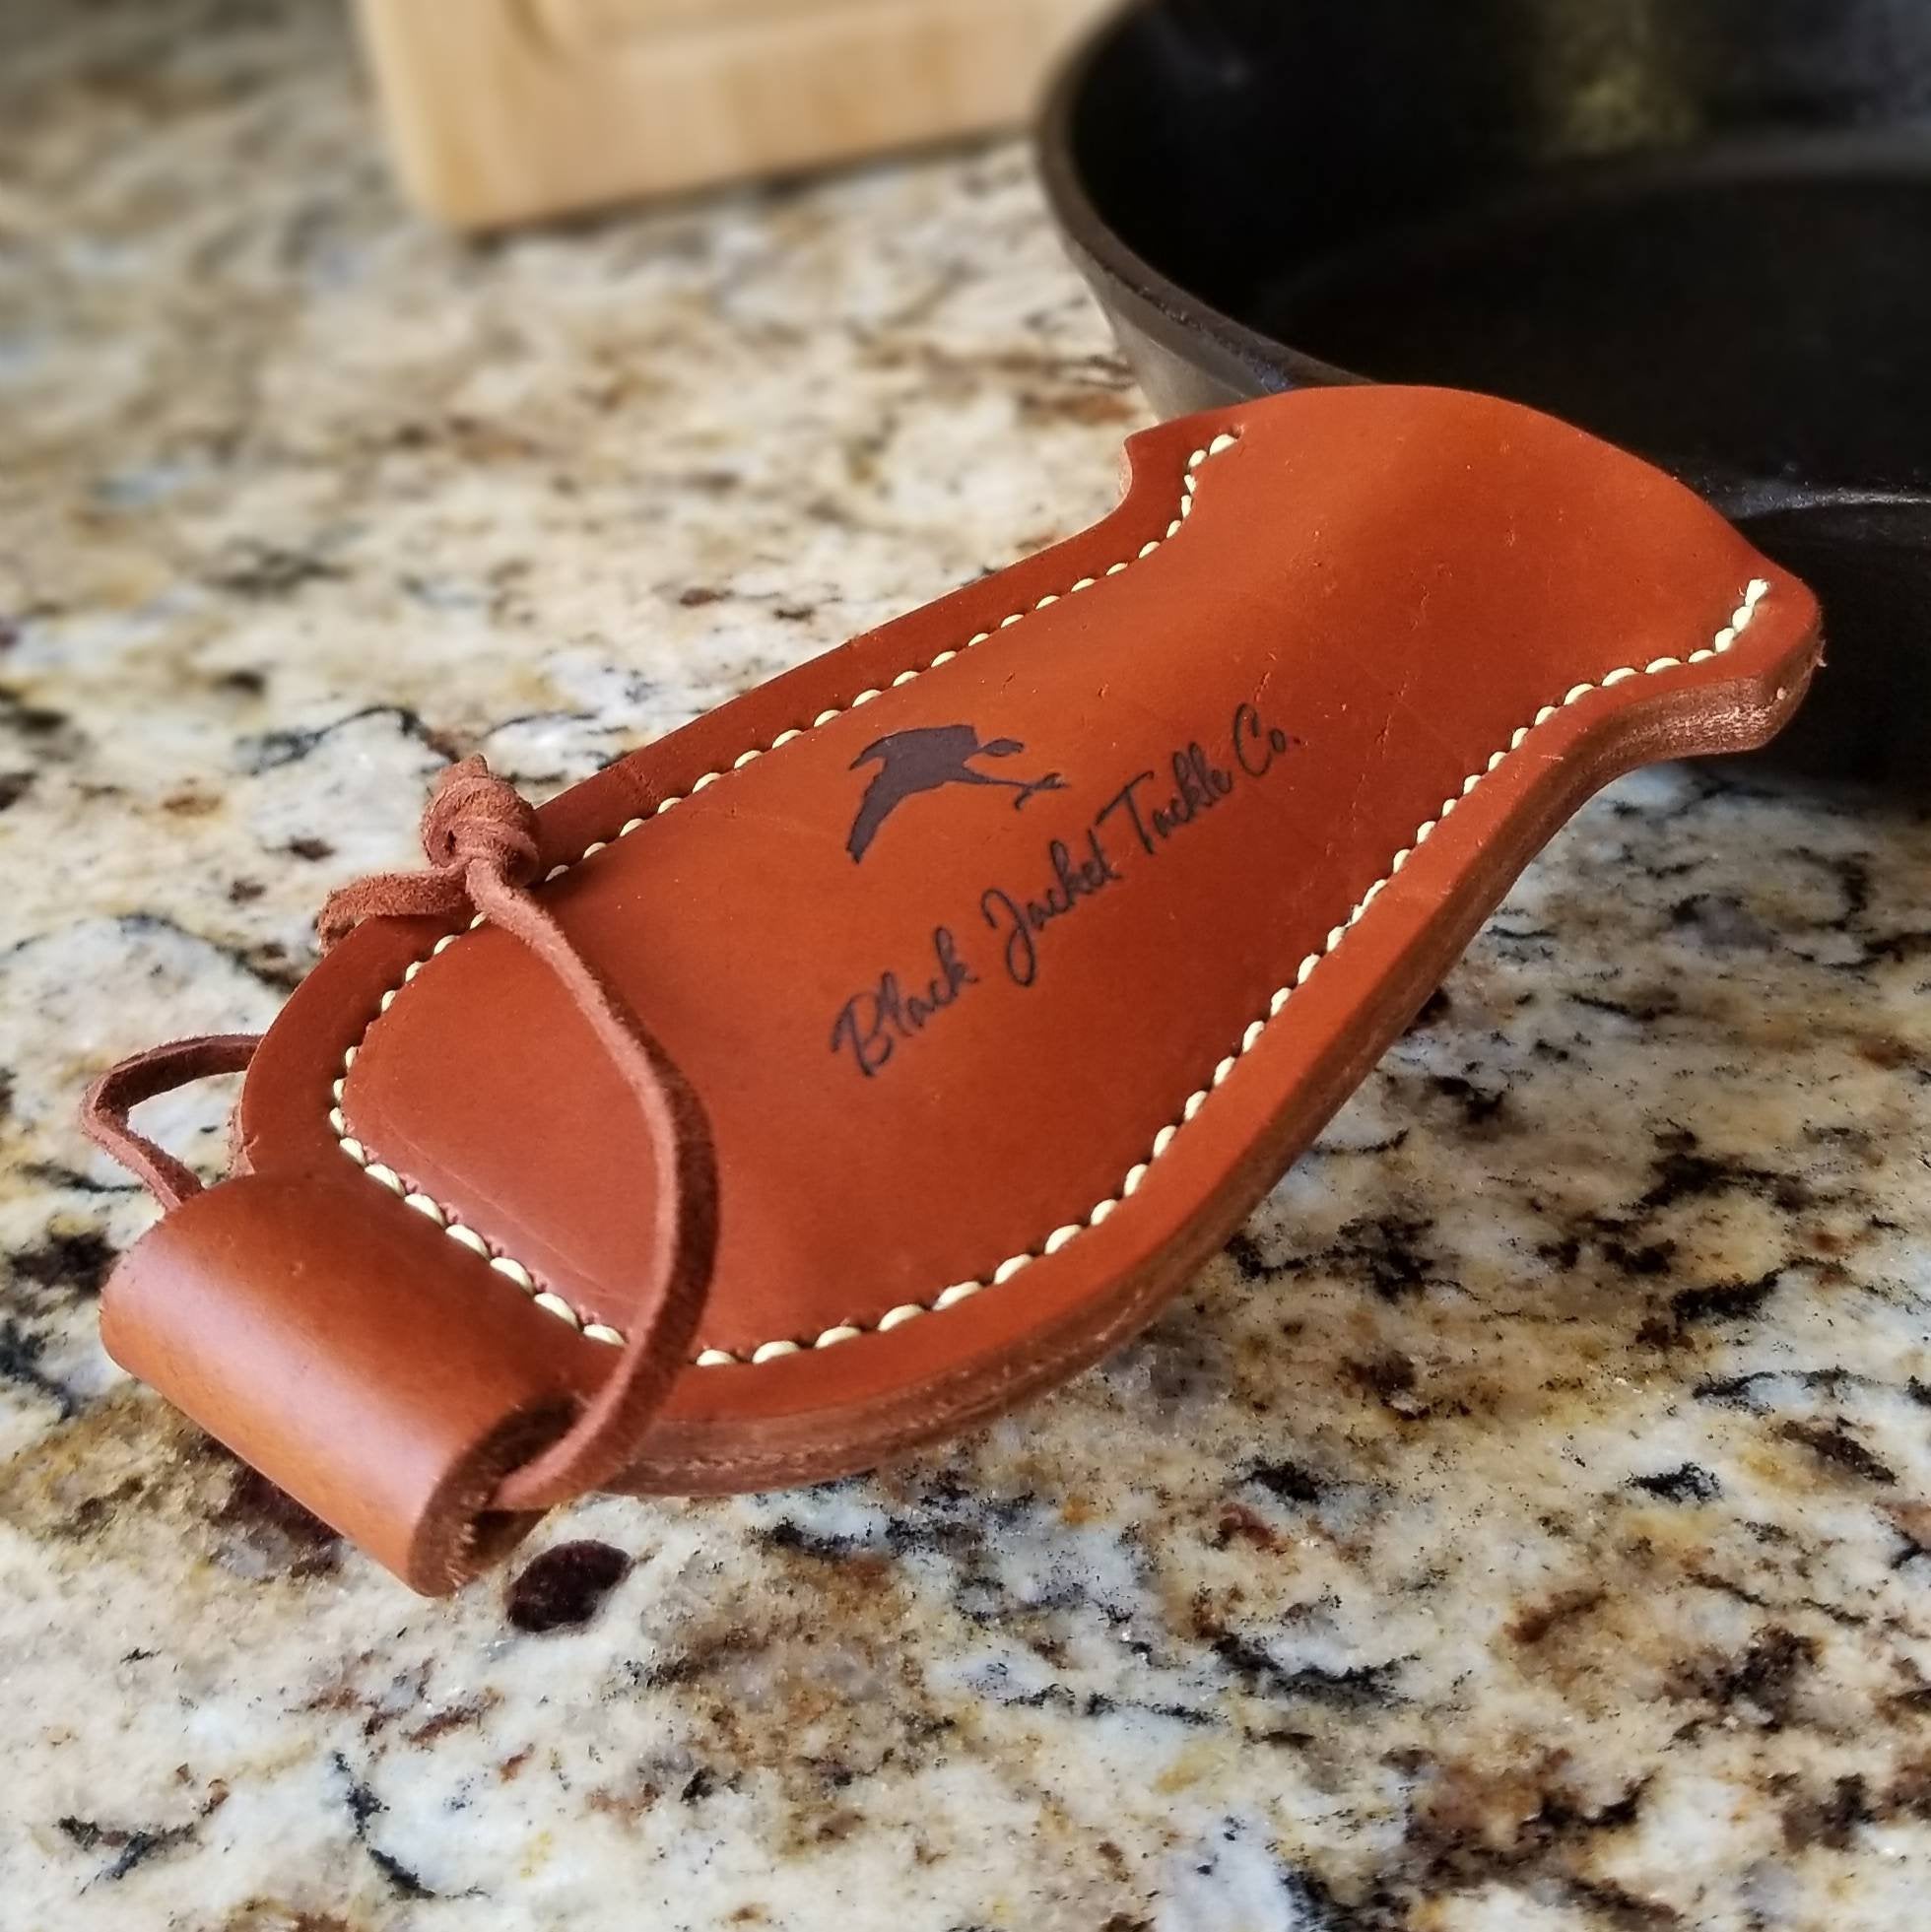 Leather Handle Cover for Cast Iron Skillets & Pans 